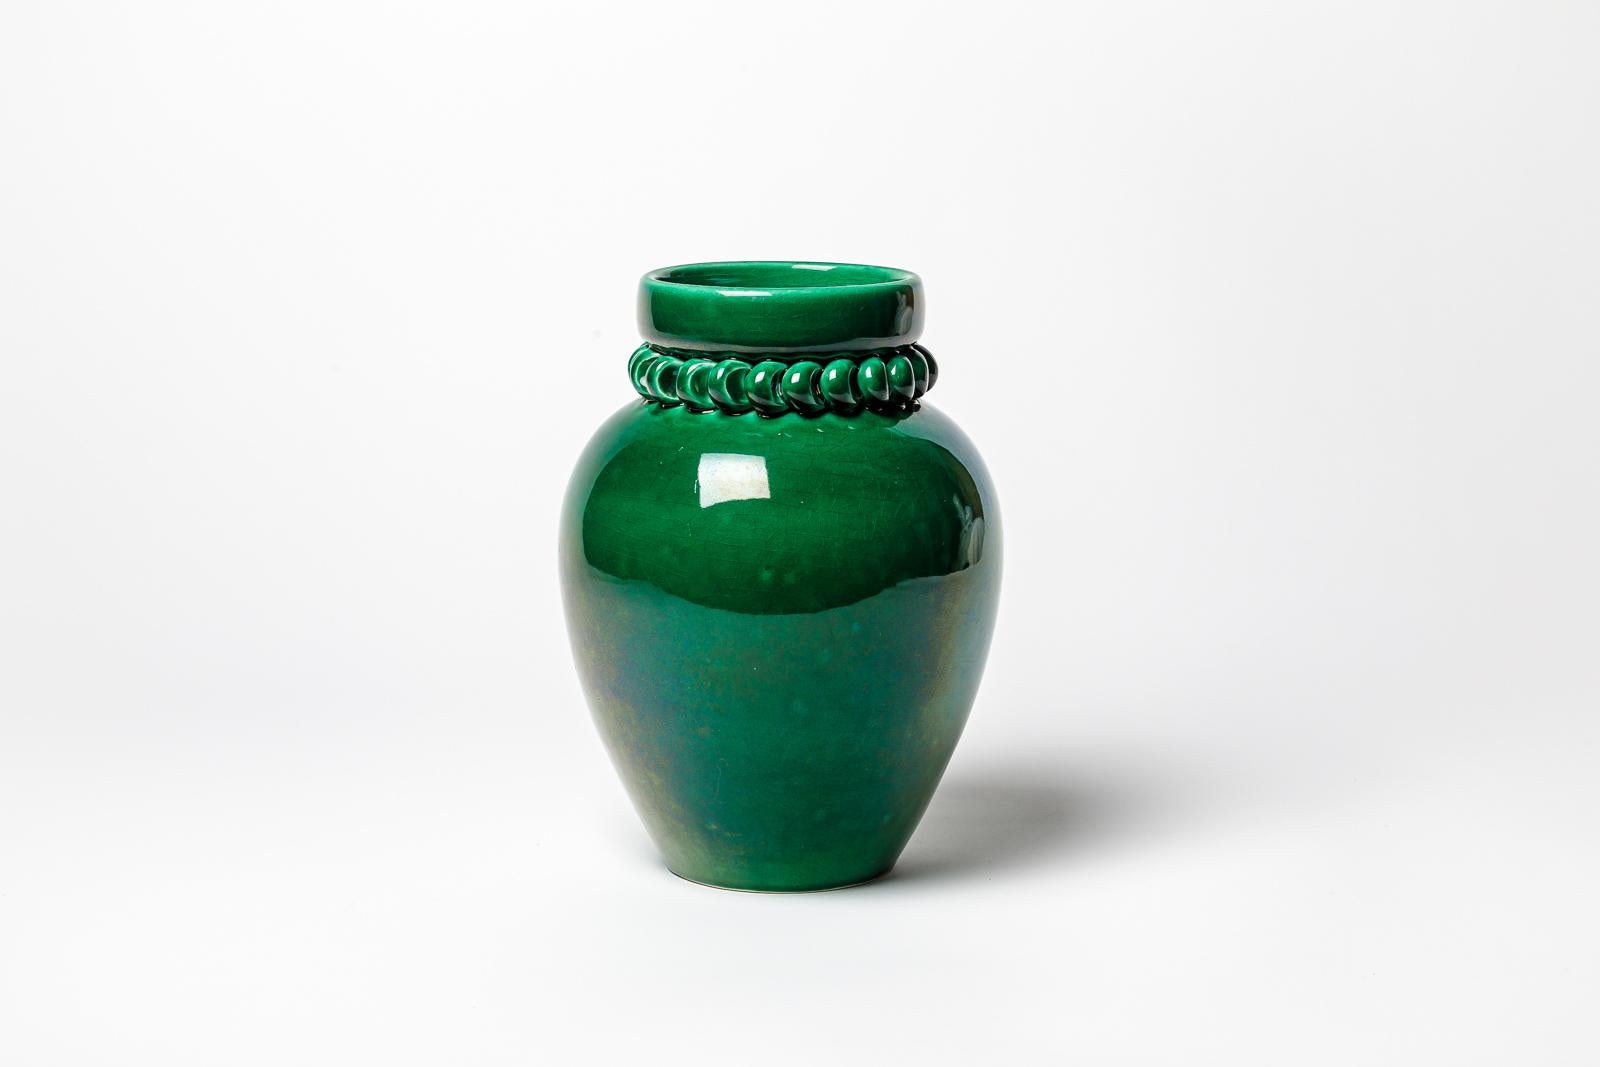 Beaux Arts Green glazed ceramic vase by Pol Chambost, circa 1930-1940. For Sale